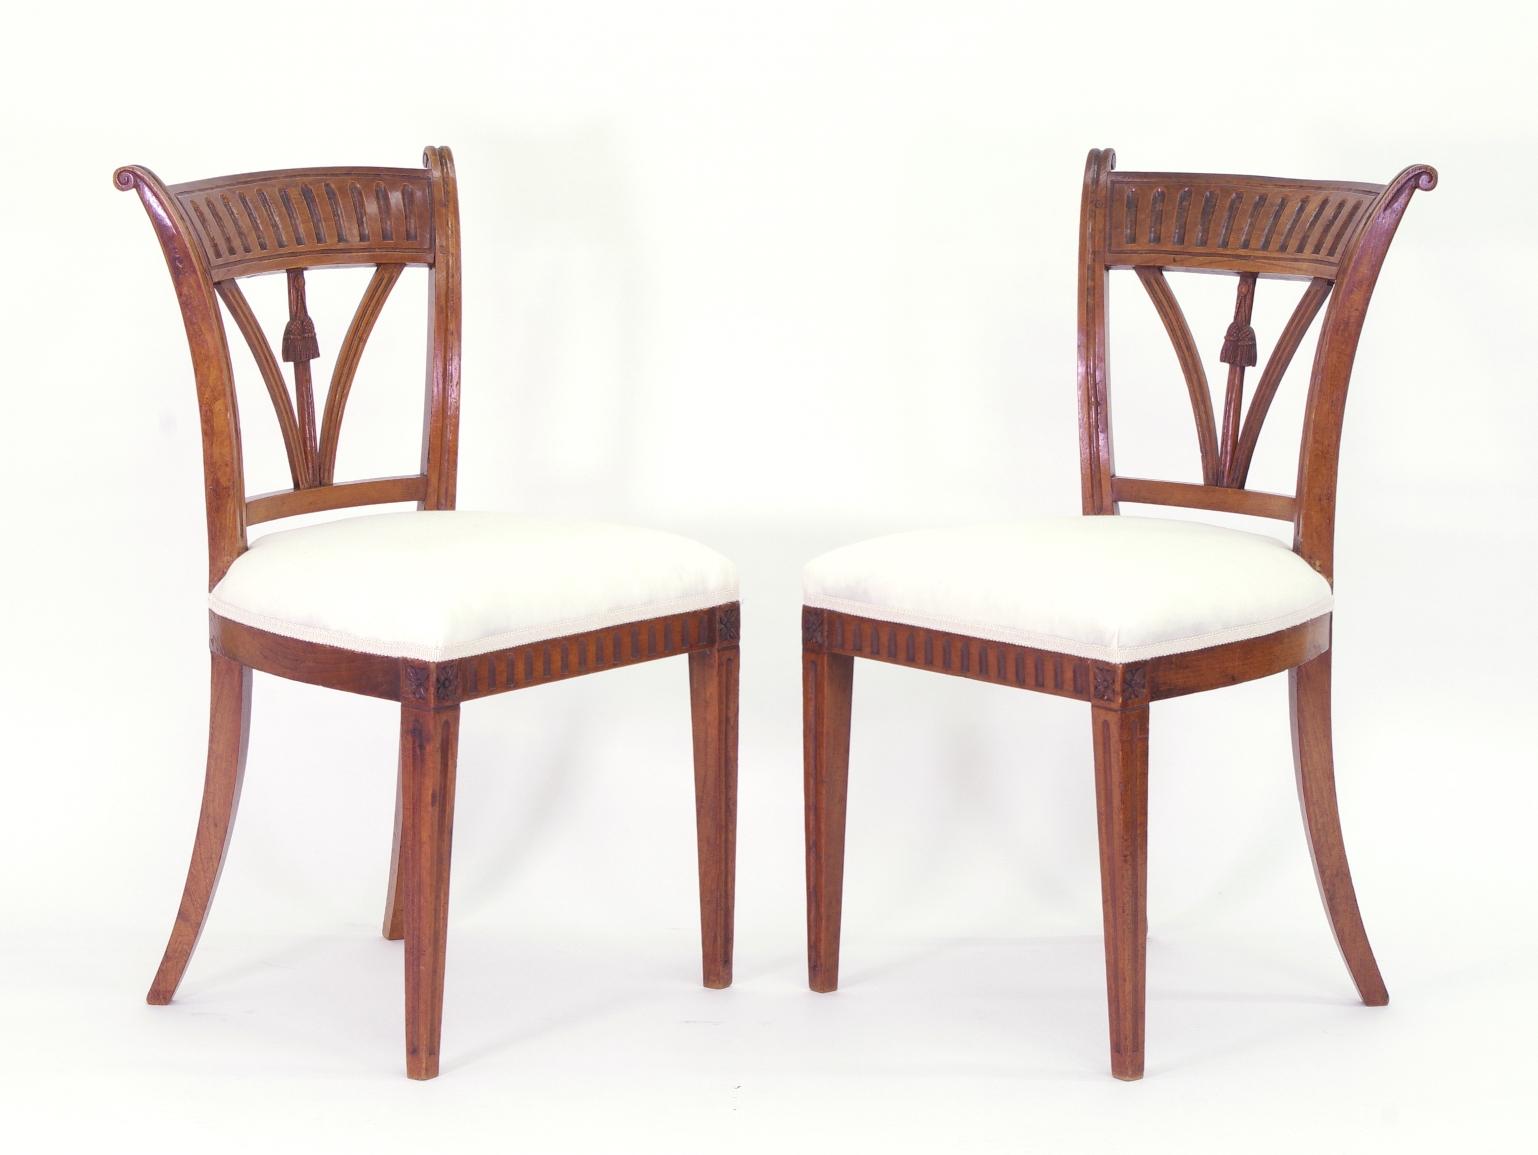 Set of four Italian solid ash side chairs, each with a fluted tablet over the spindle back with carved tassels; the upholstered seats on square tapered and fluted legs.

These delightful chairs have beautiful color and patina. Recently polished